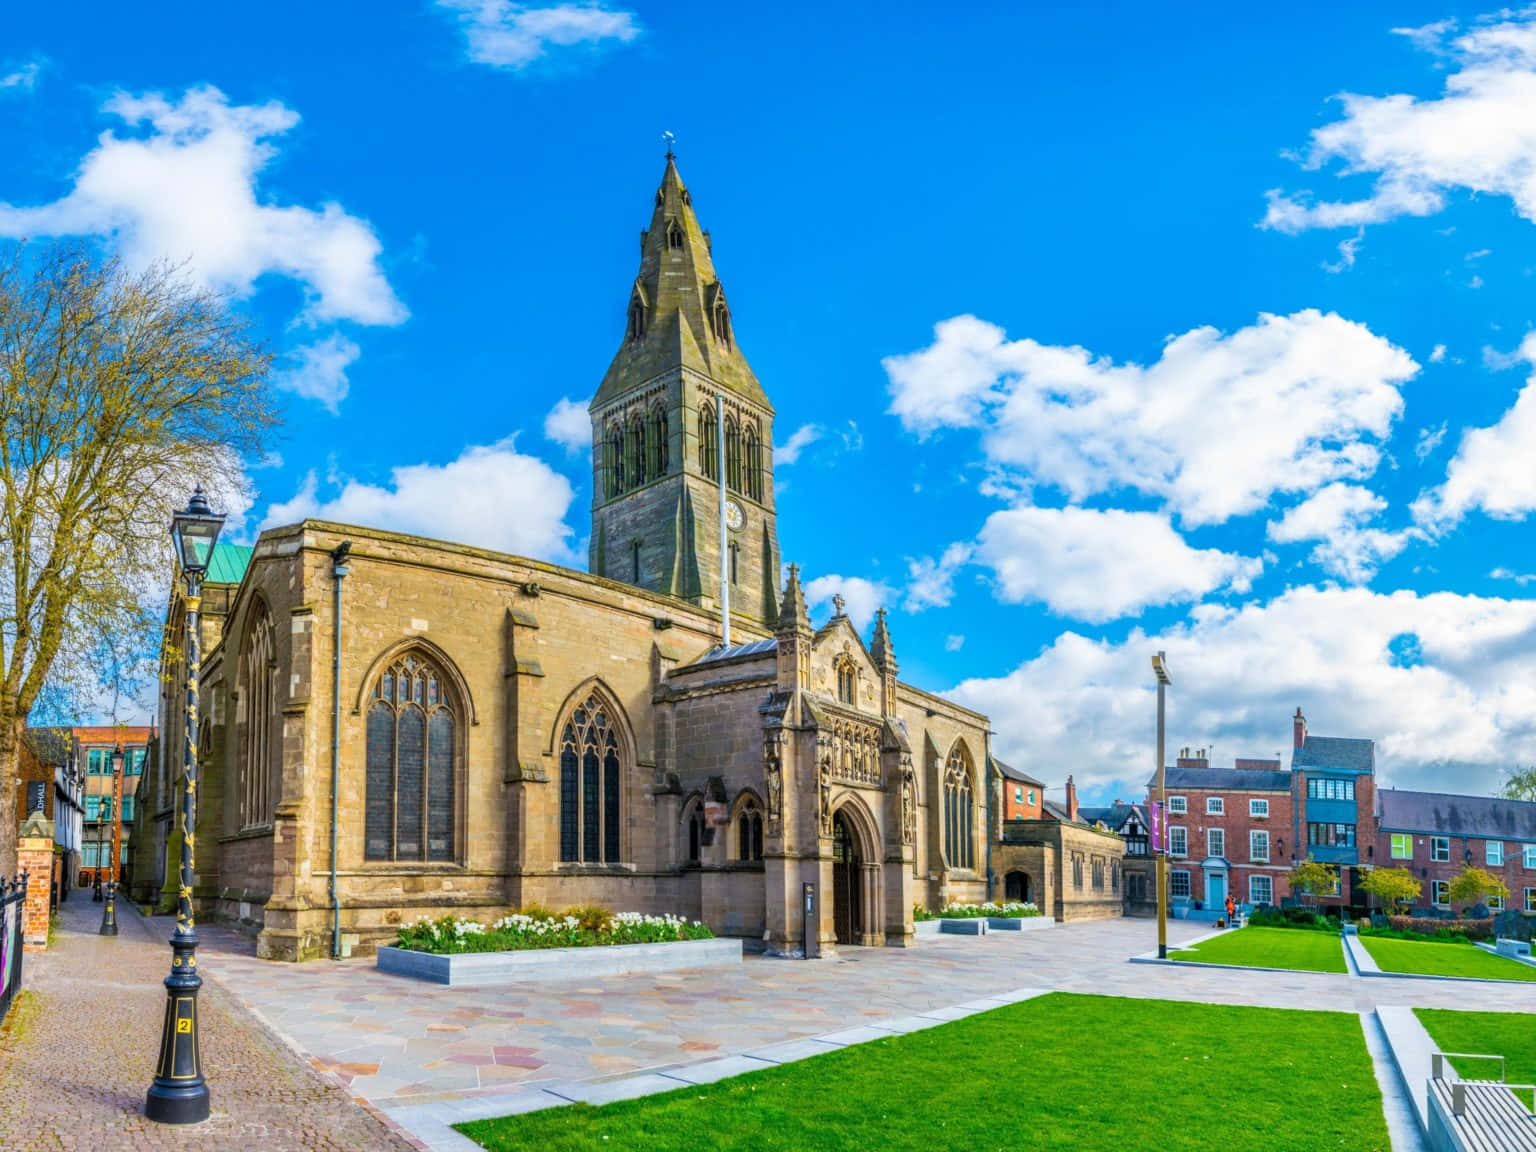 Leicester Cathedraland Surroundings Wallpaper